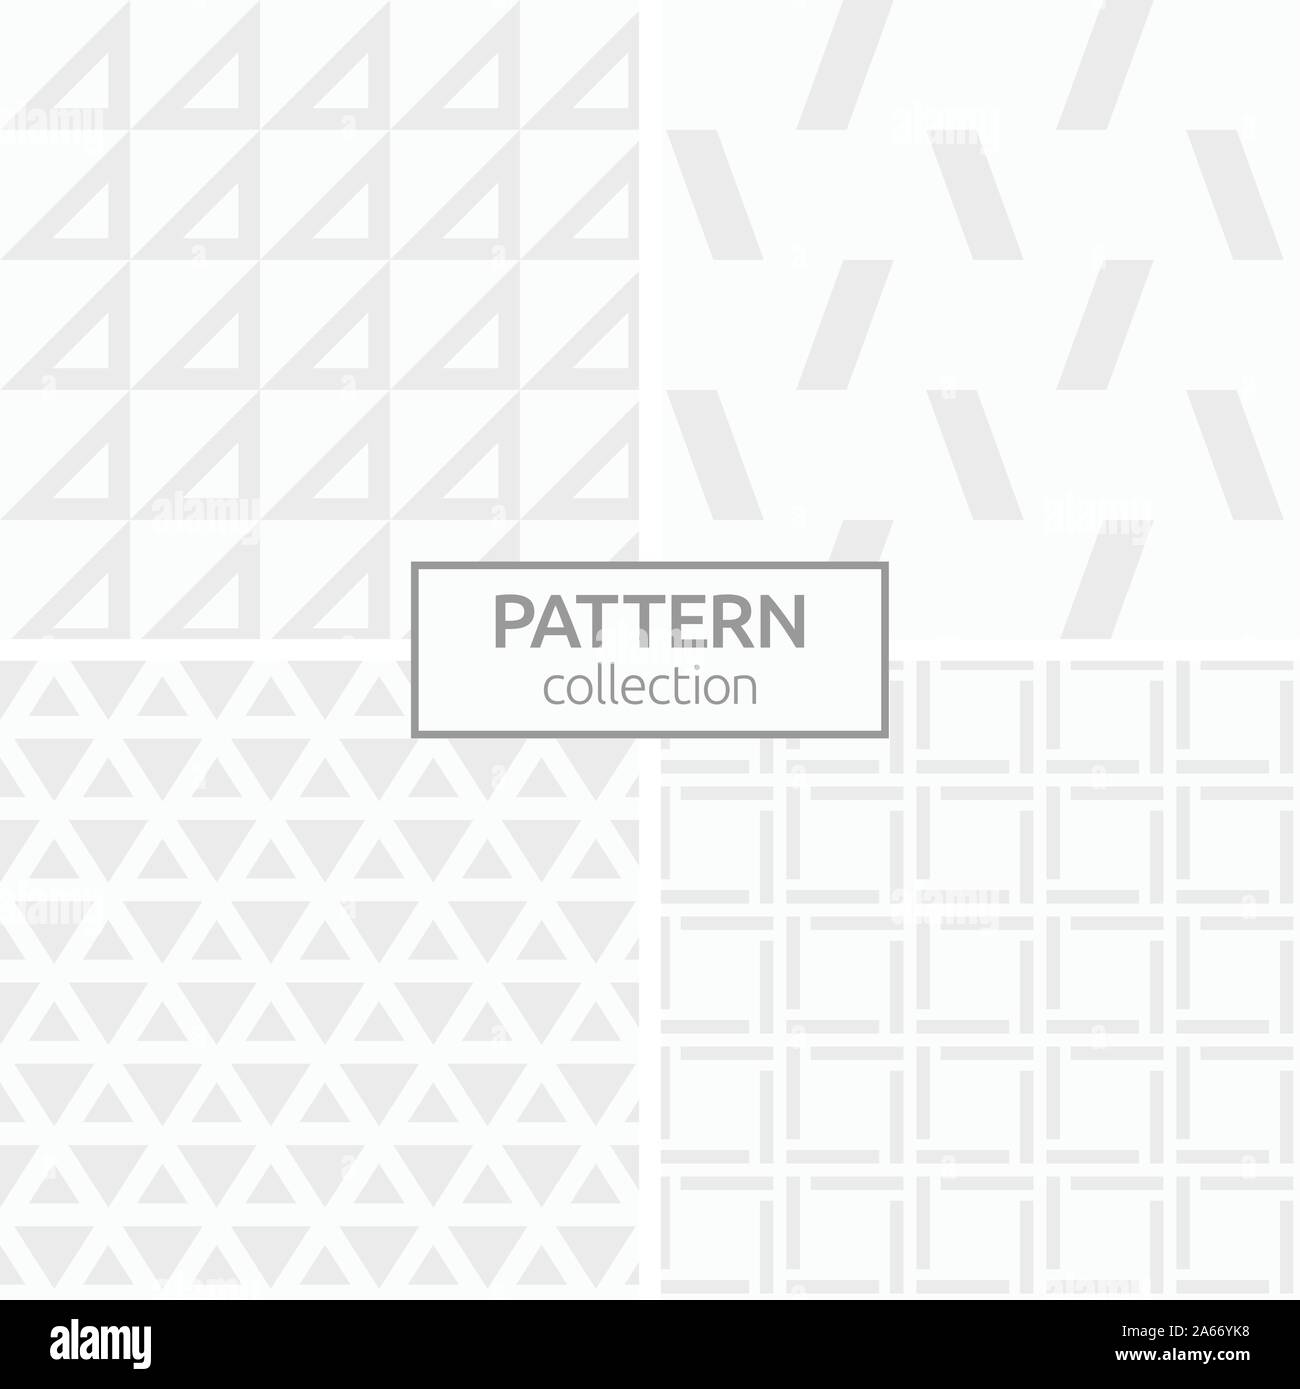 Set of four abstract geometric seamless patterns. Modern stylish backgrounds. White and gray geometric textures. Regular repeating geometric shapes. Stock Vector